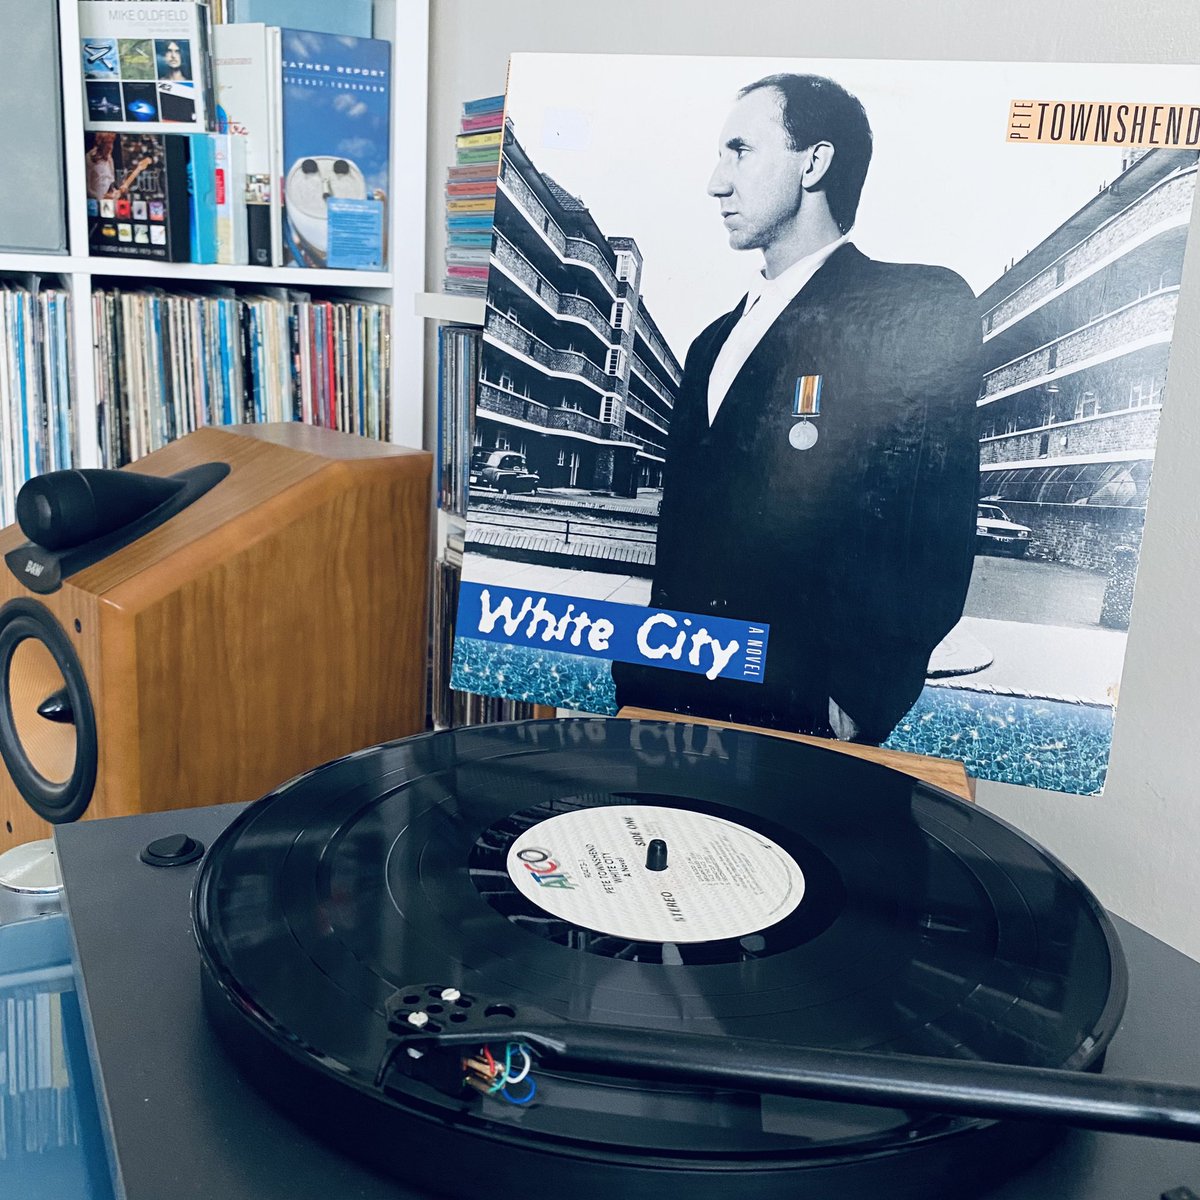 Listening to Pete Townsend “White City”